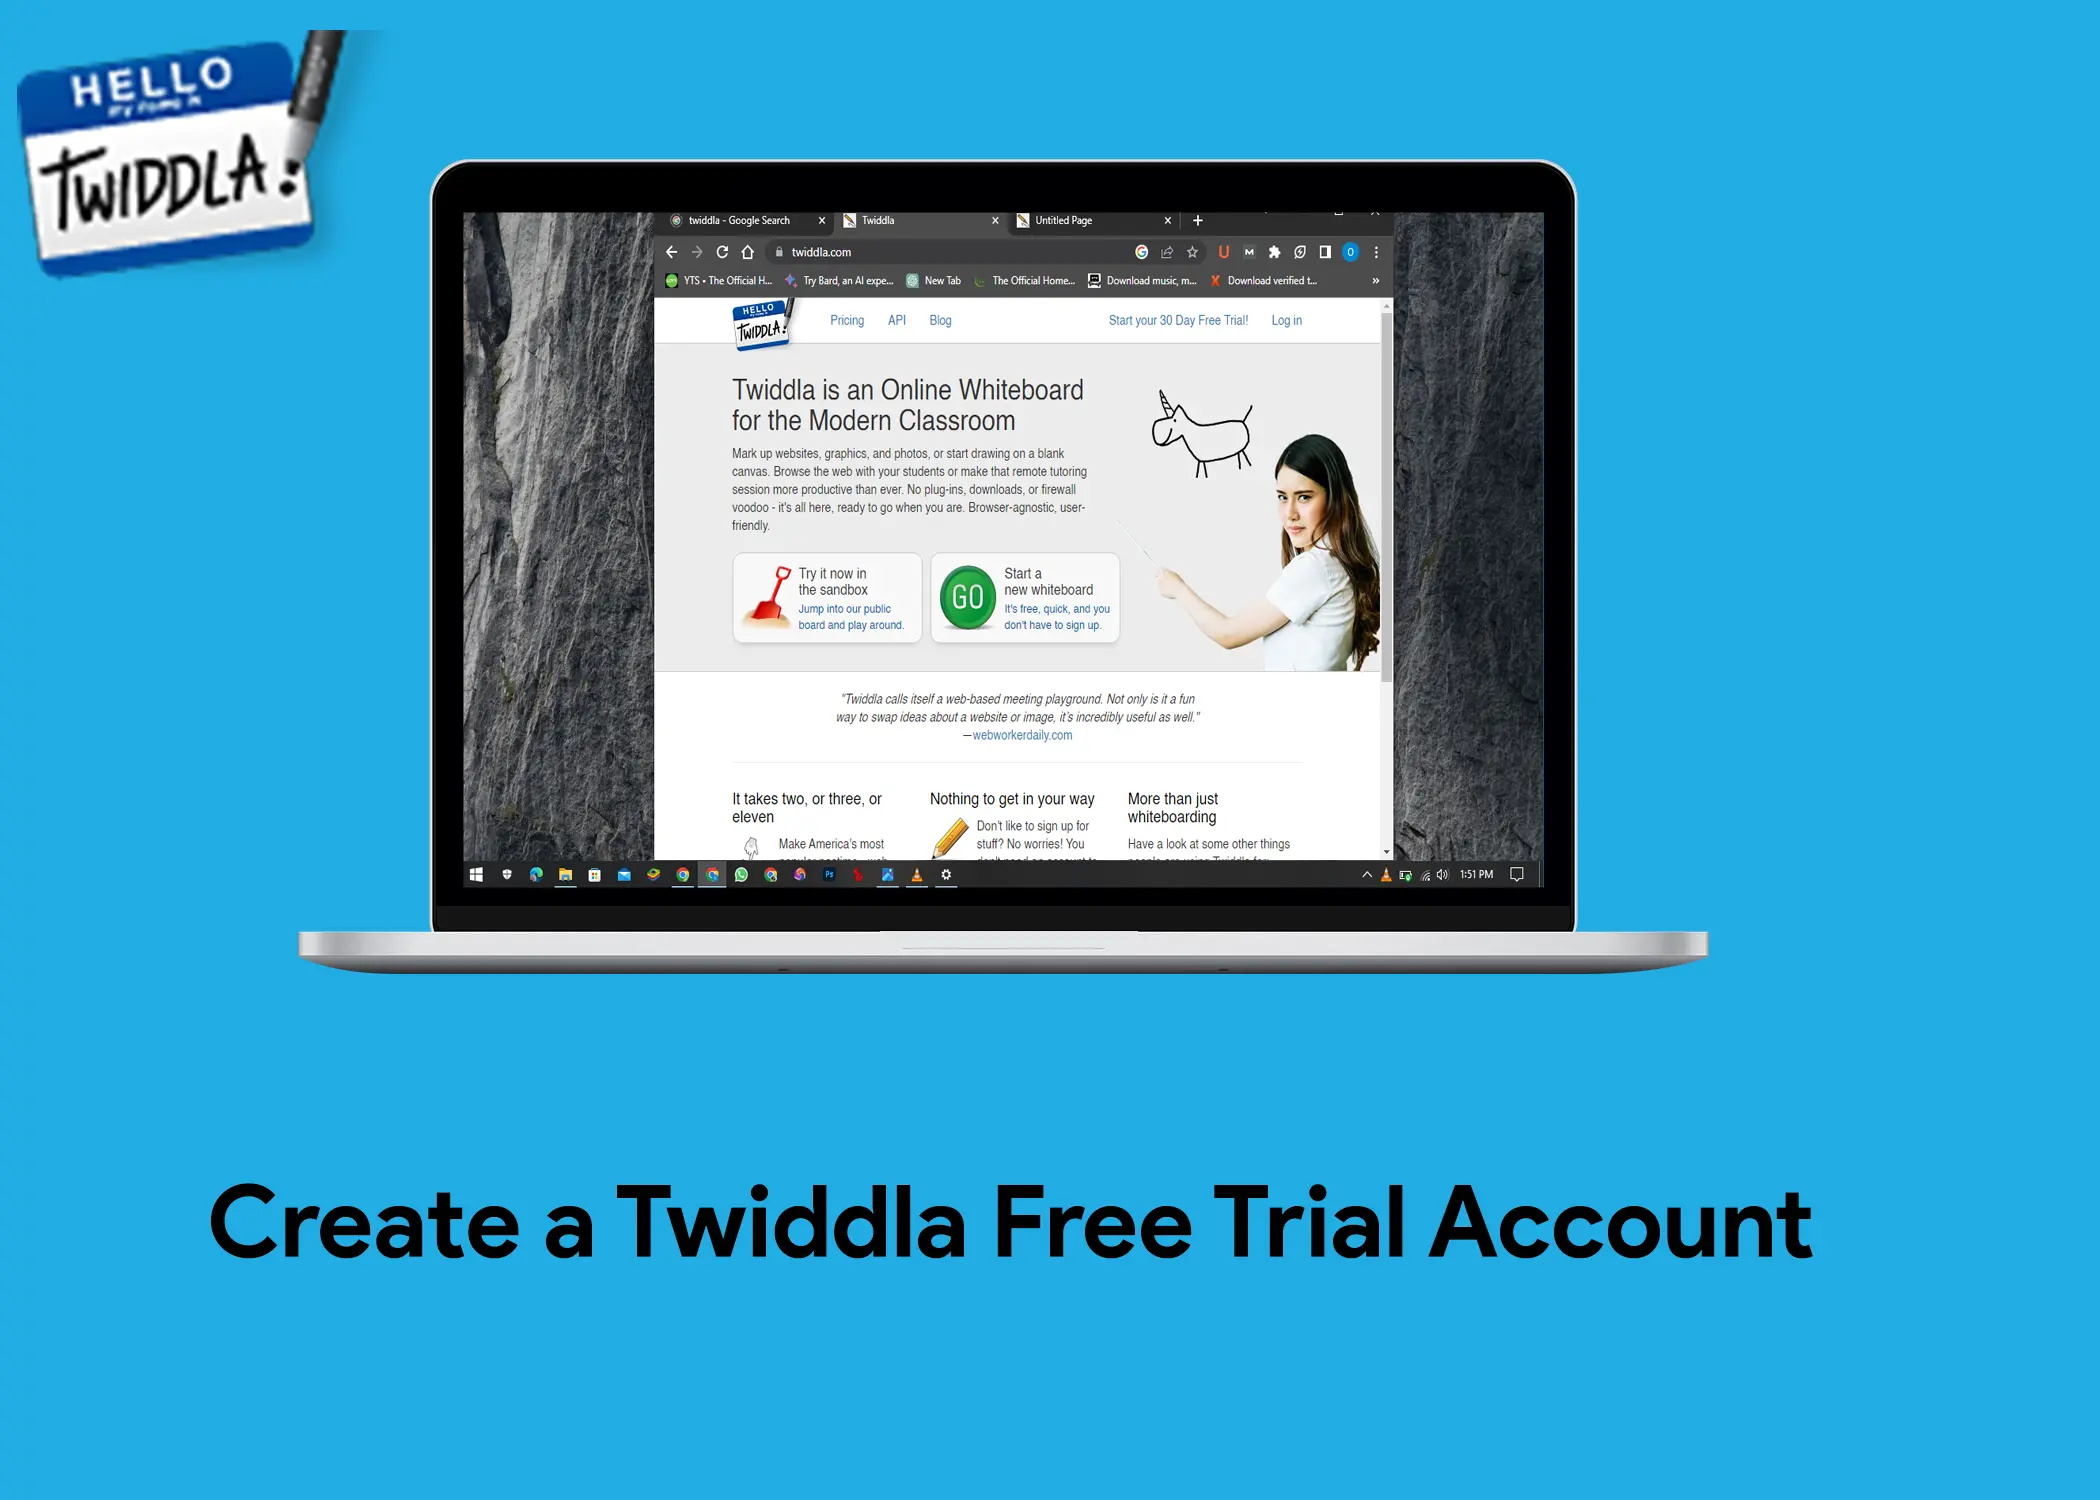 Twiddla Sign Up - How to Create a Twiddla Free Trial Account